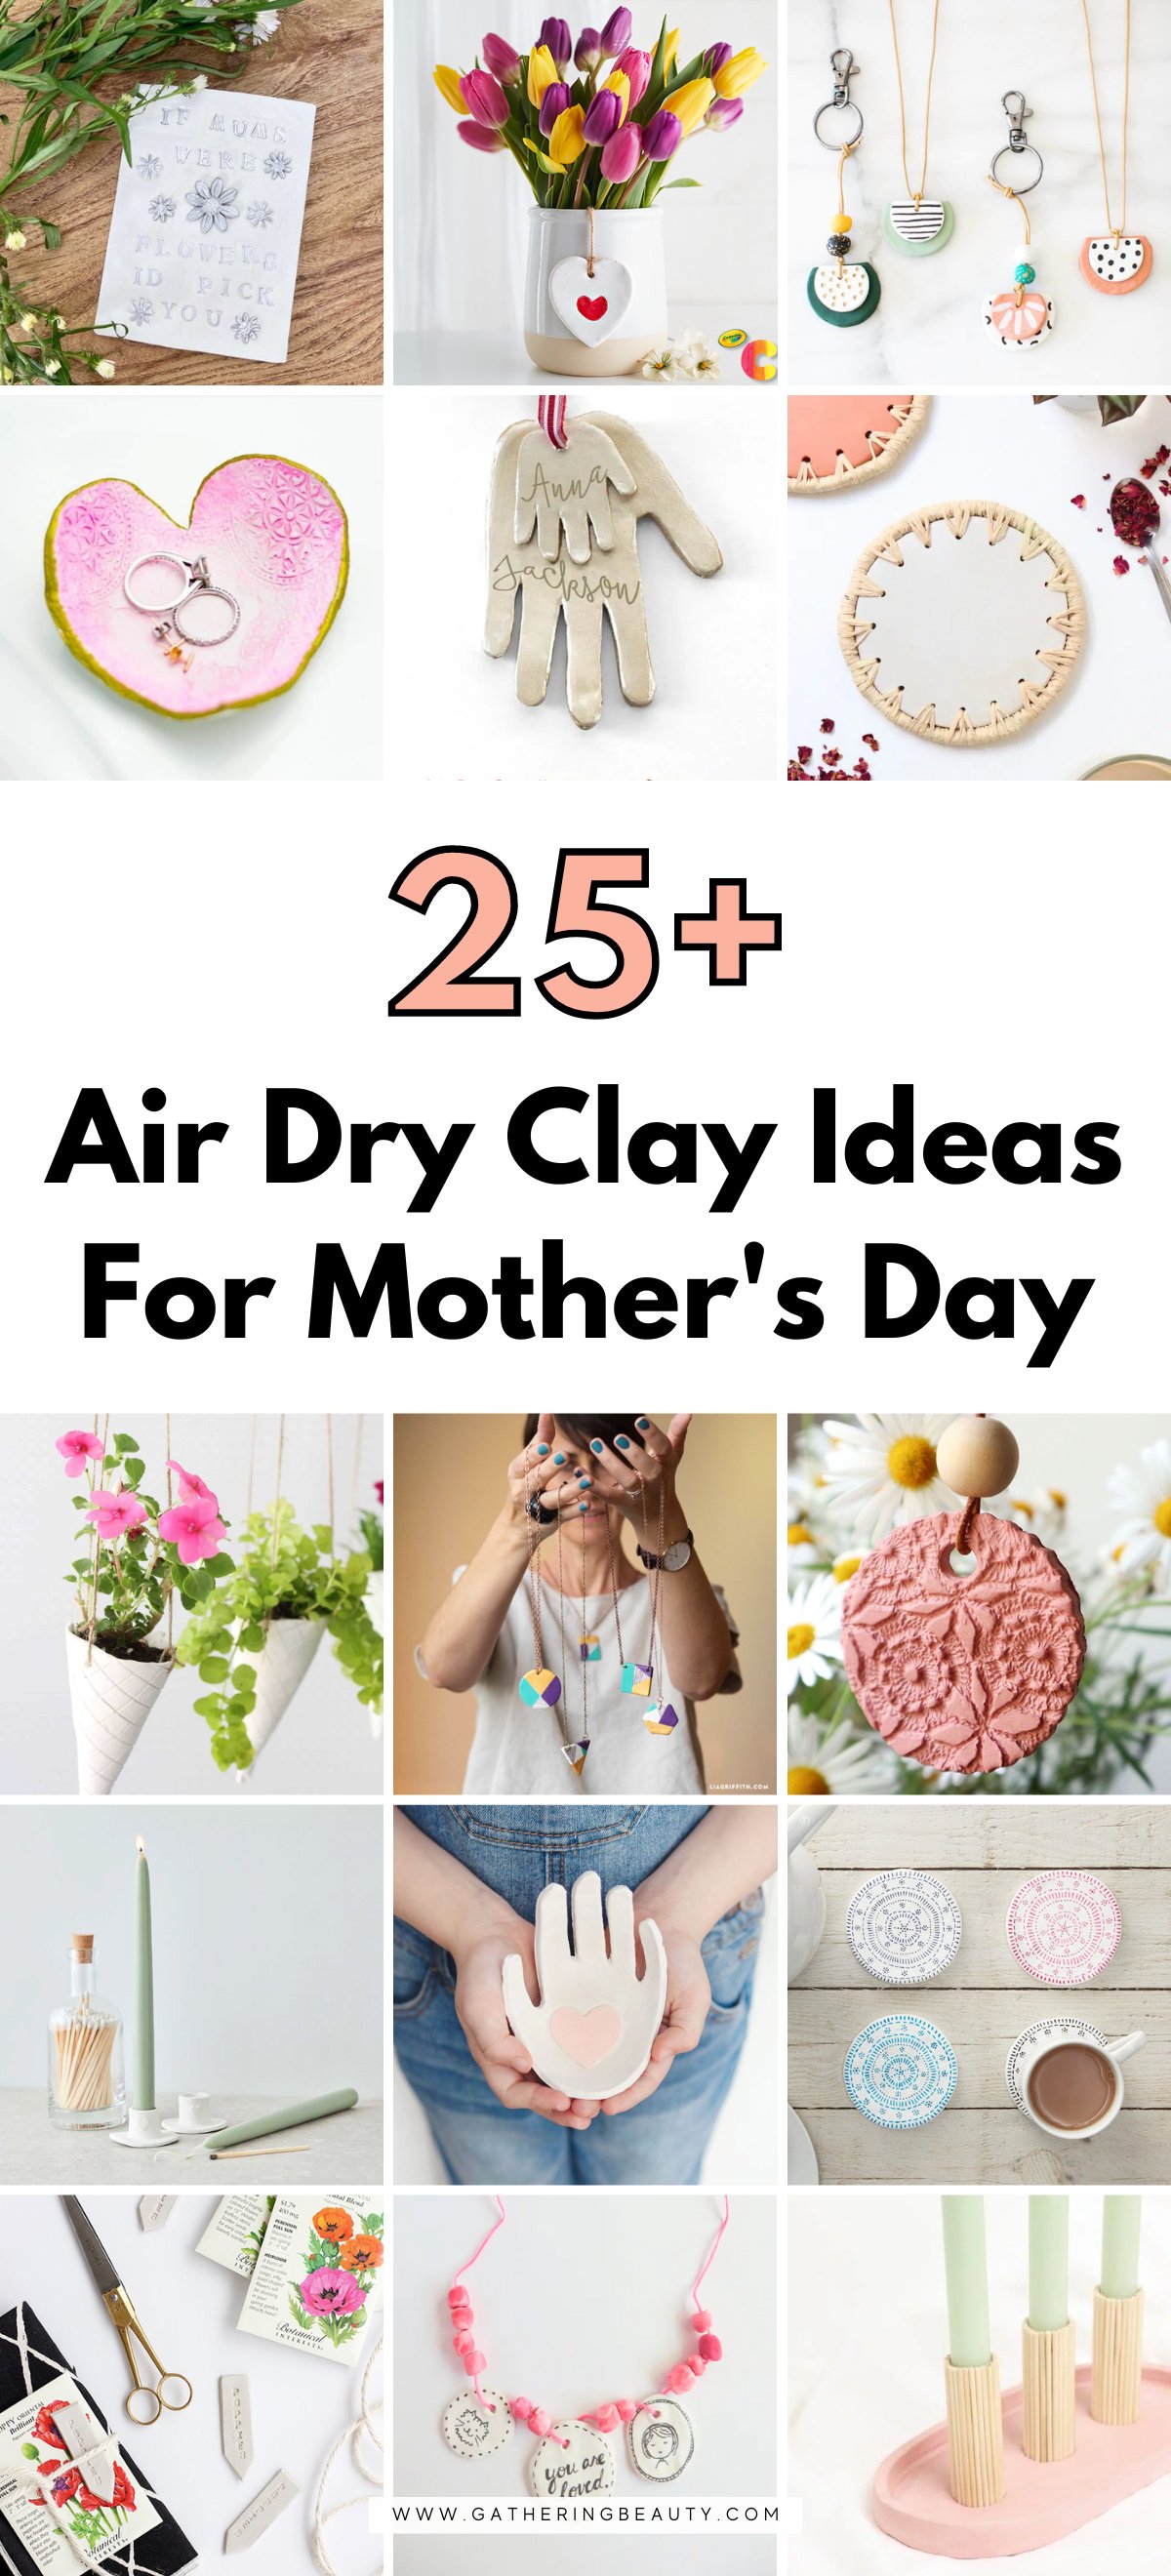 Air Dry Clay Gift Ideas  Dry clay, Air dry clay, Arts and crafts for kids